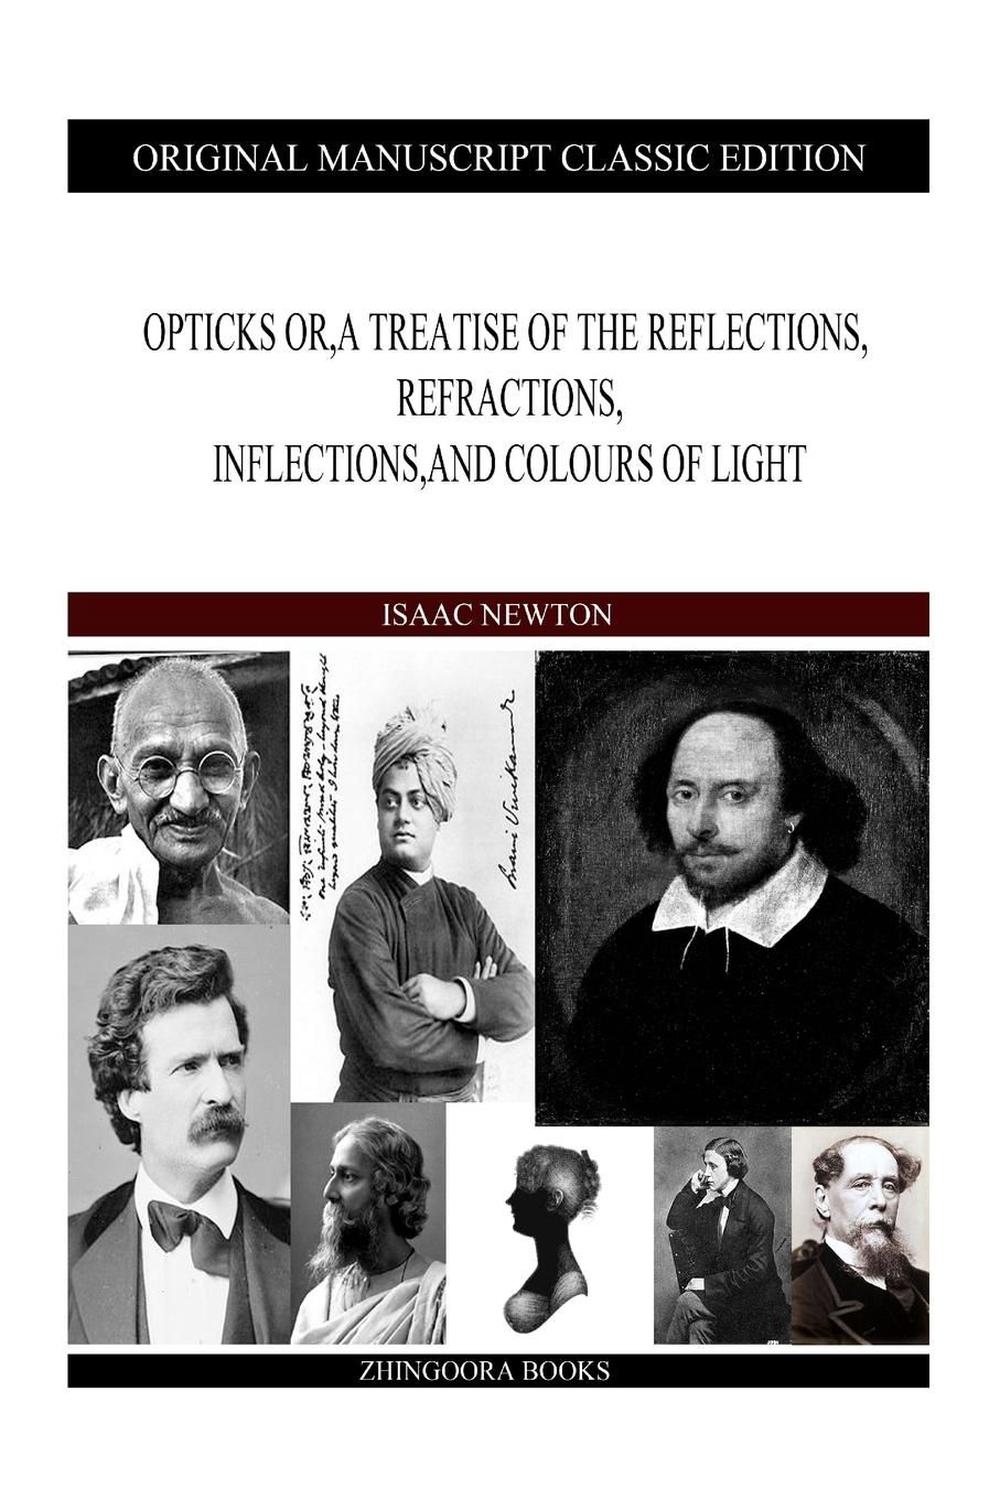 Opticks Or A Treatise Of The Reflections Refractions Inflections And Colours 9781490310923 0354